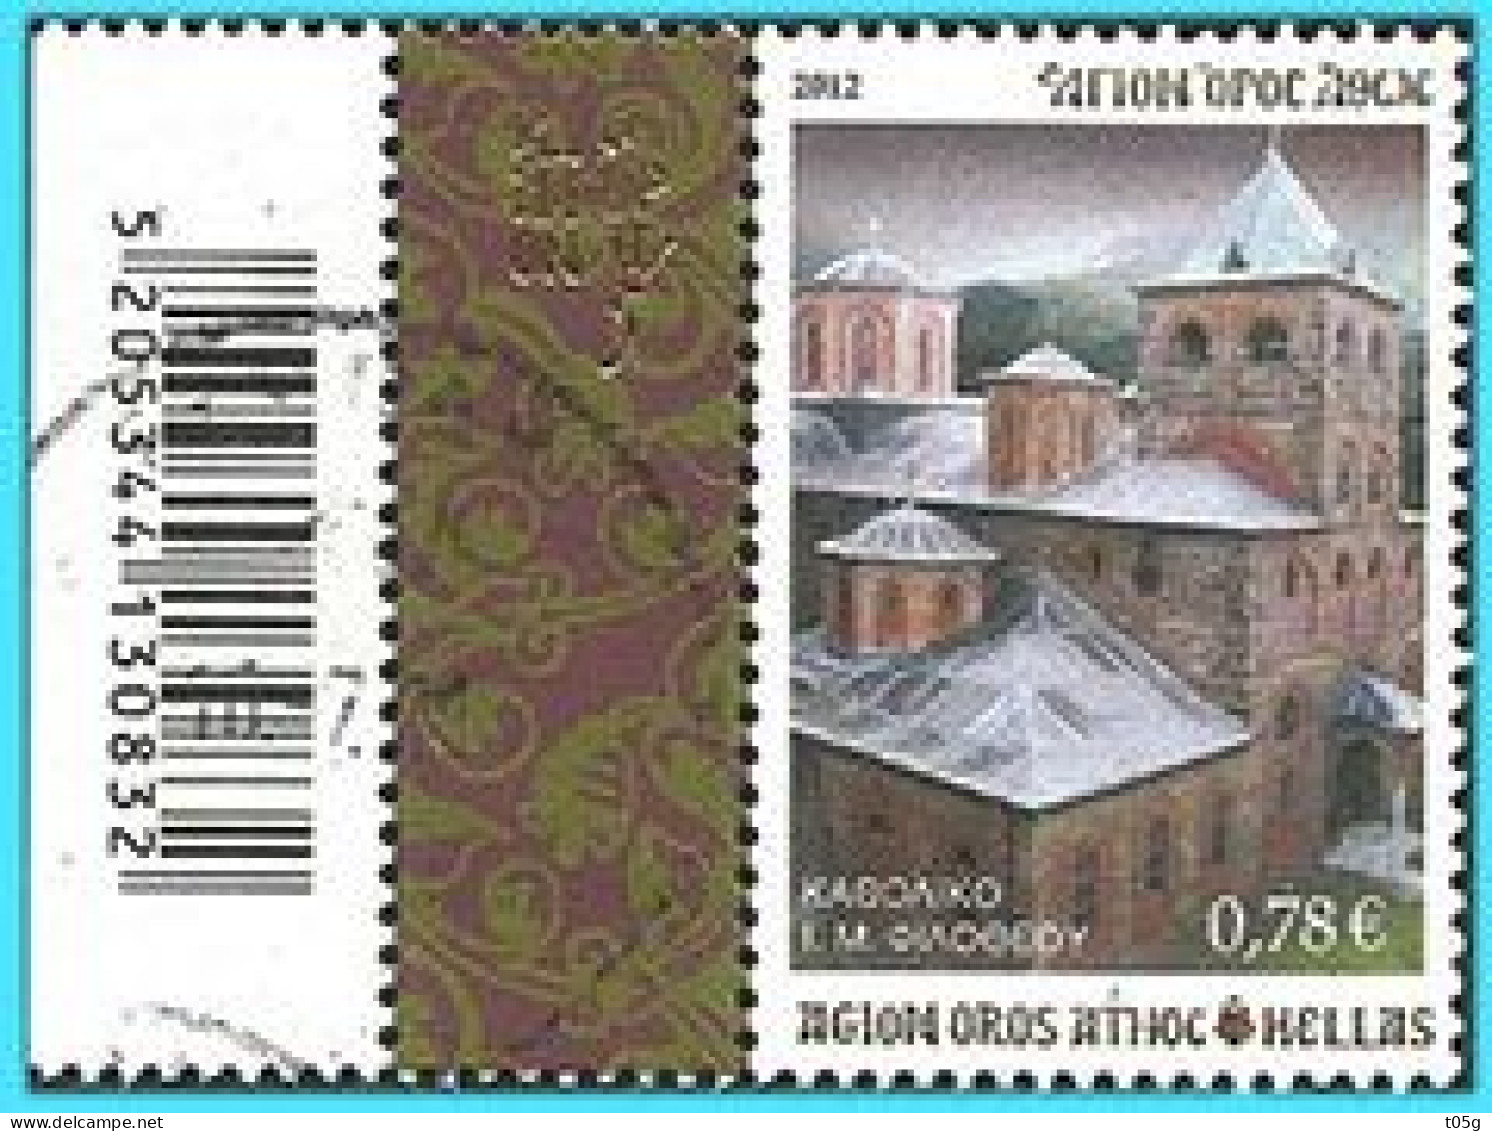 GREECE- GRECE- HELLAS - AGION OROS 2012: 0.78€  (with Barcode) From Set Used - Usati